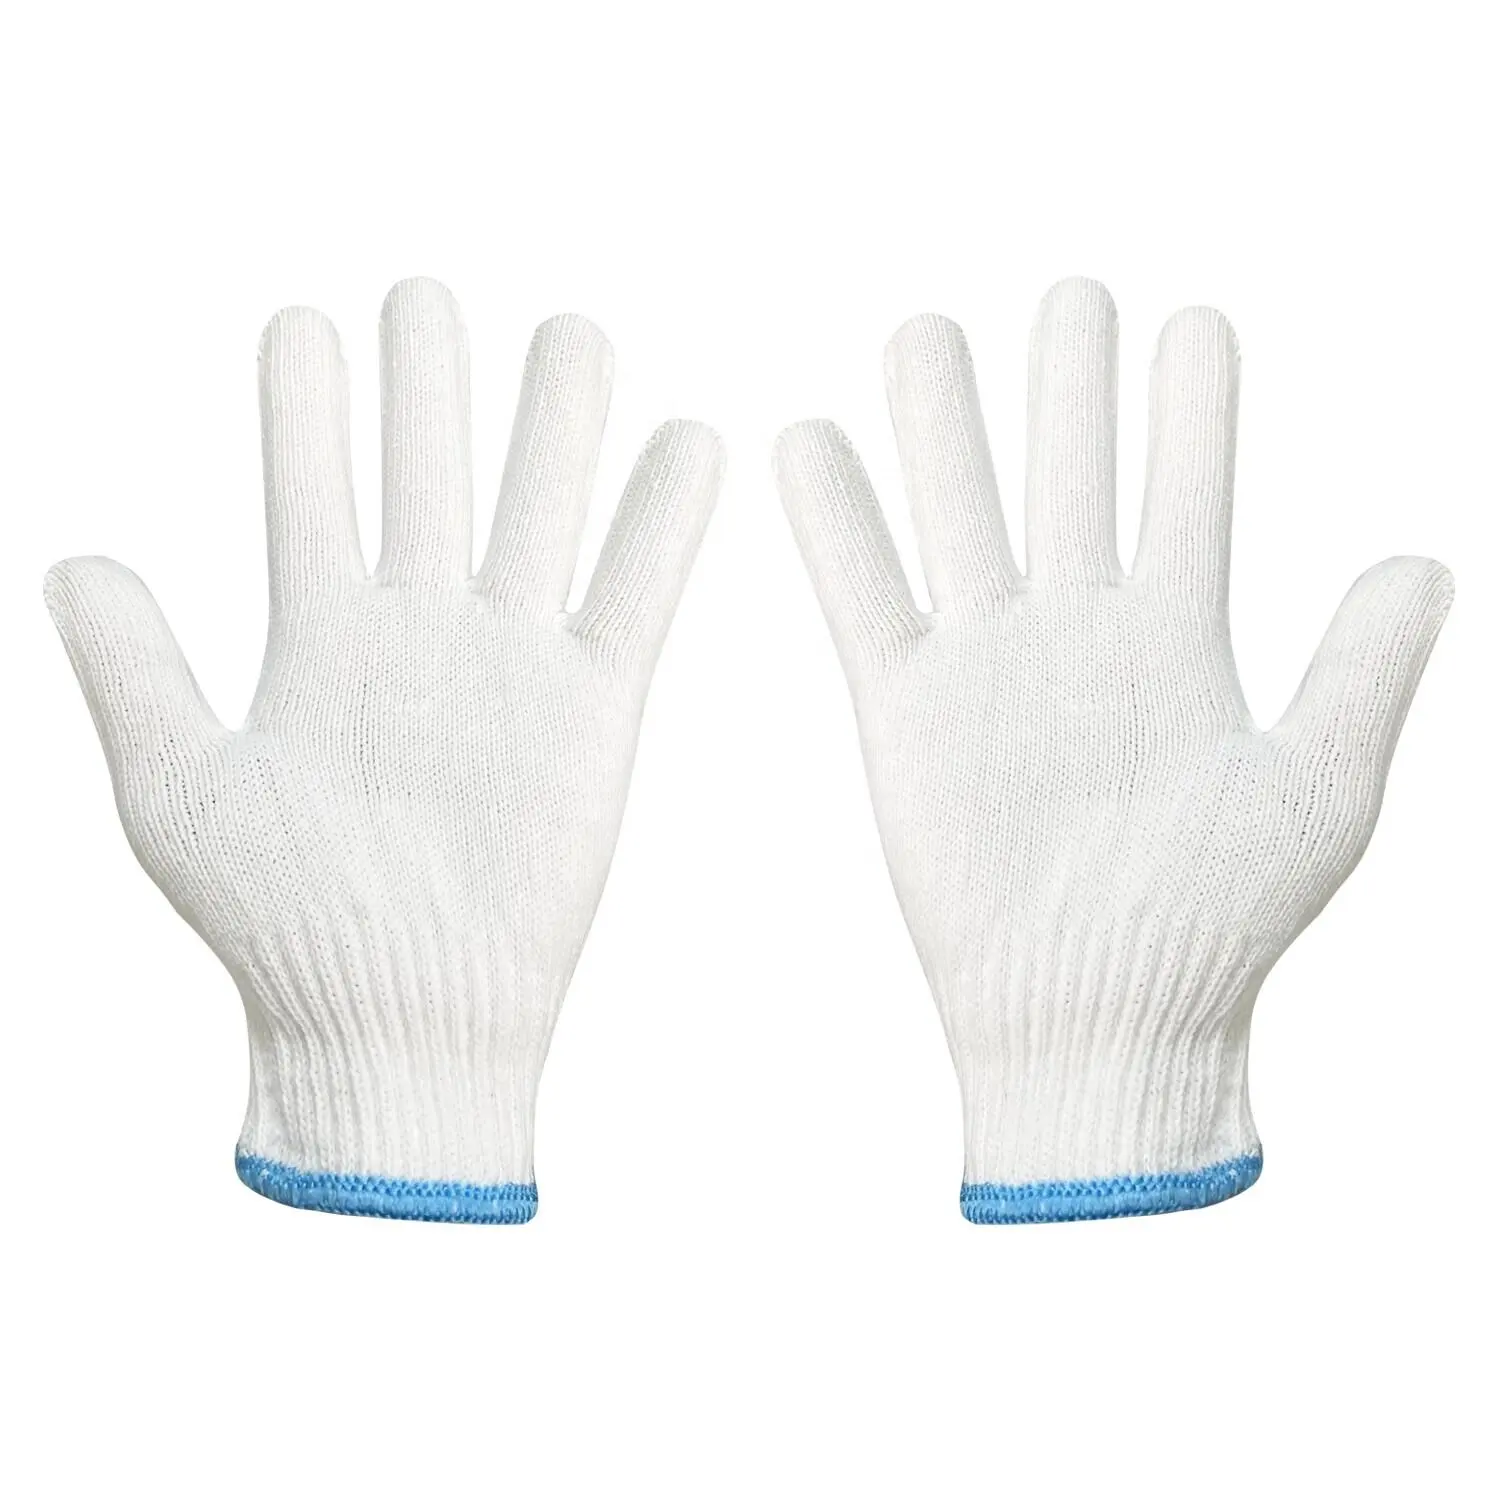 China Wholesale 7/10 Gauge Knitted Cotton Gloves Garden Working Guantes Safety Work Labor Glove for Construction